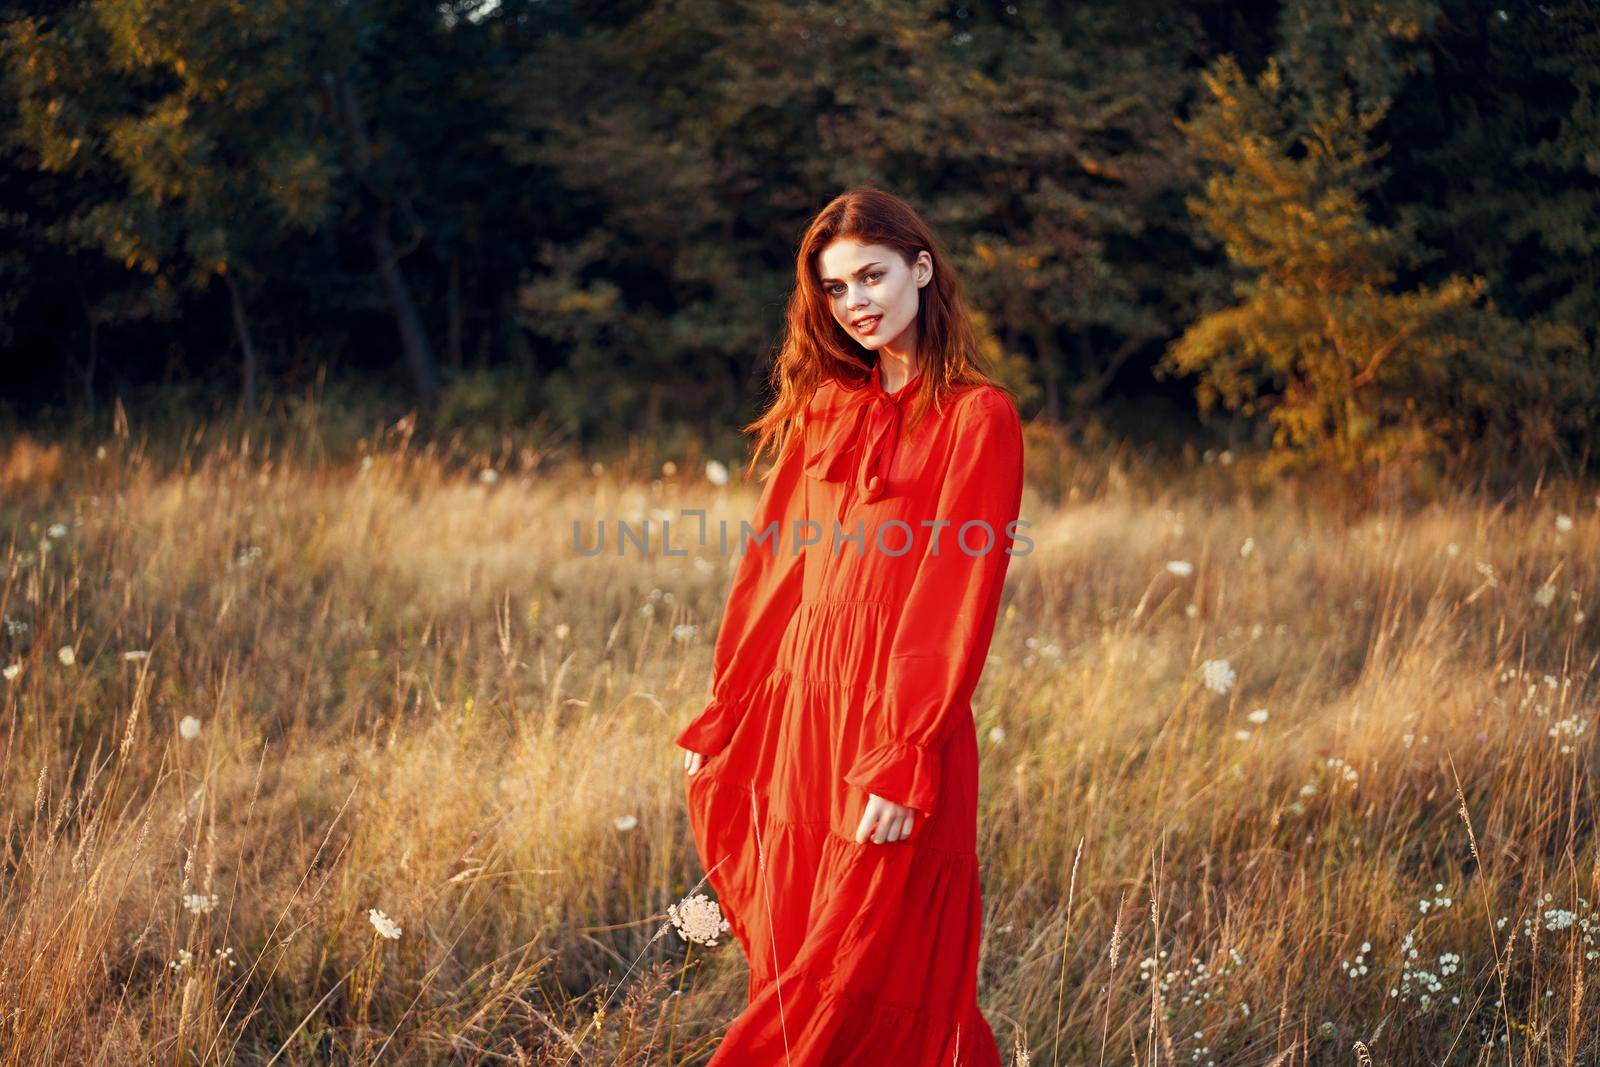 woman in a red dress in a field in nature summer landscape freedom. High quality photo